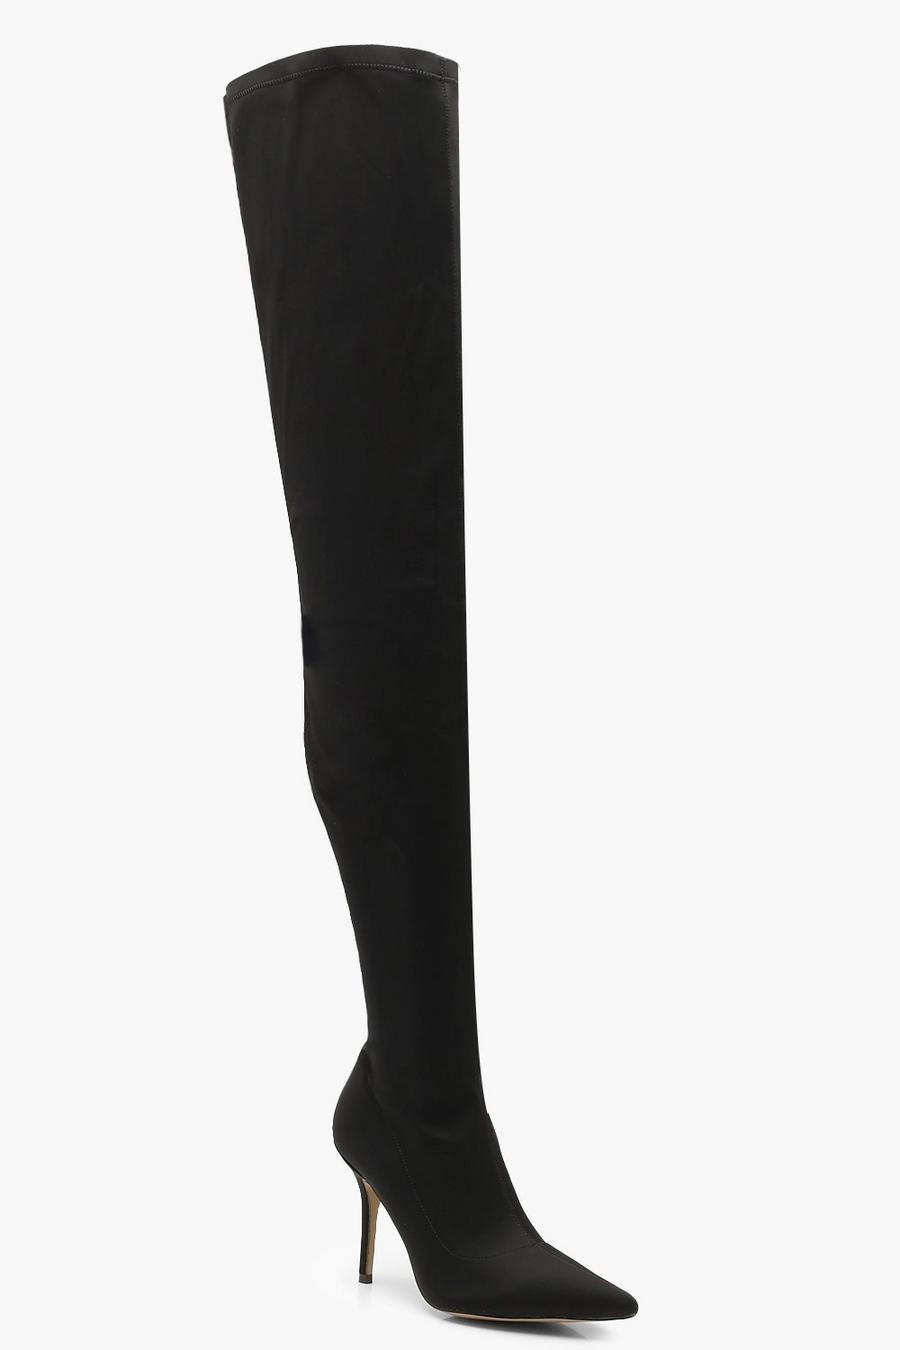 Black Stiletto Heel Thigh High Boots image number 1